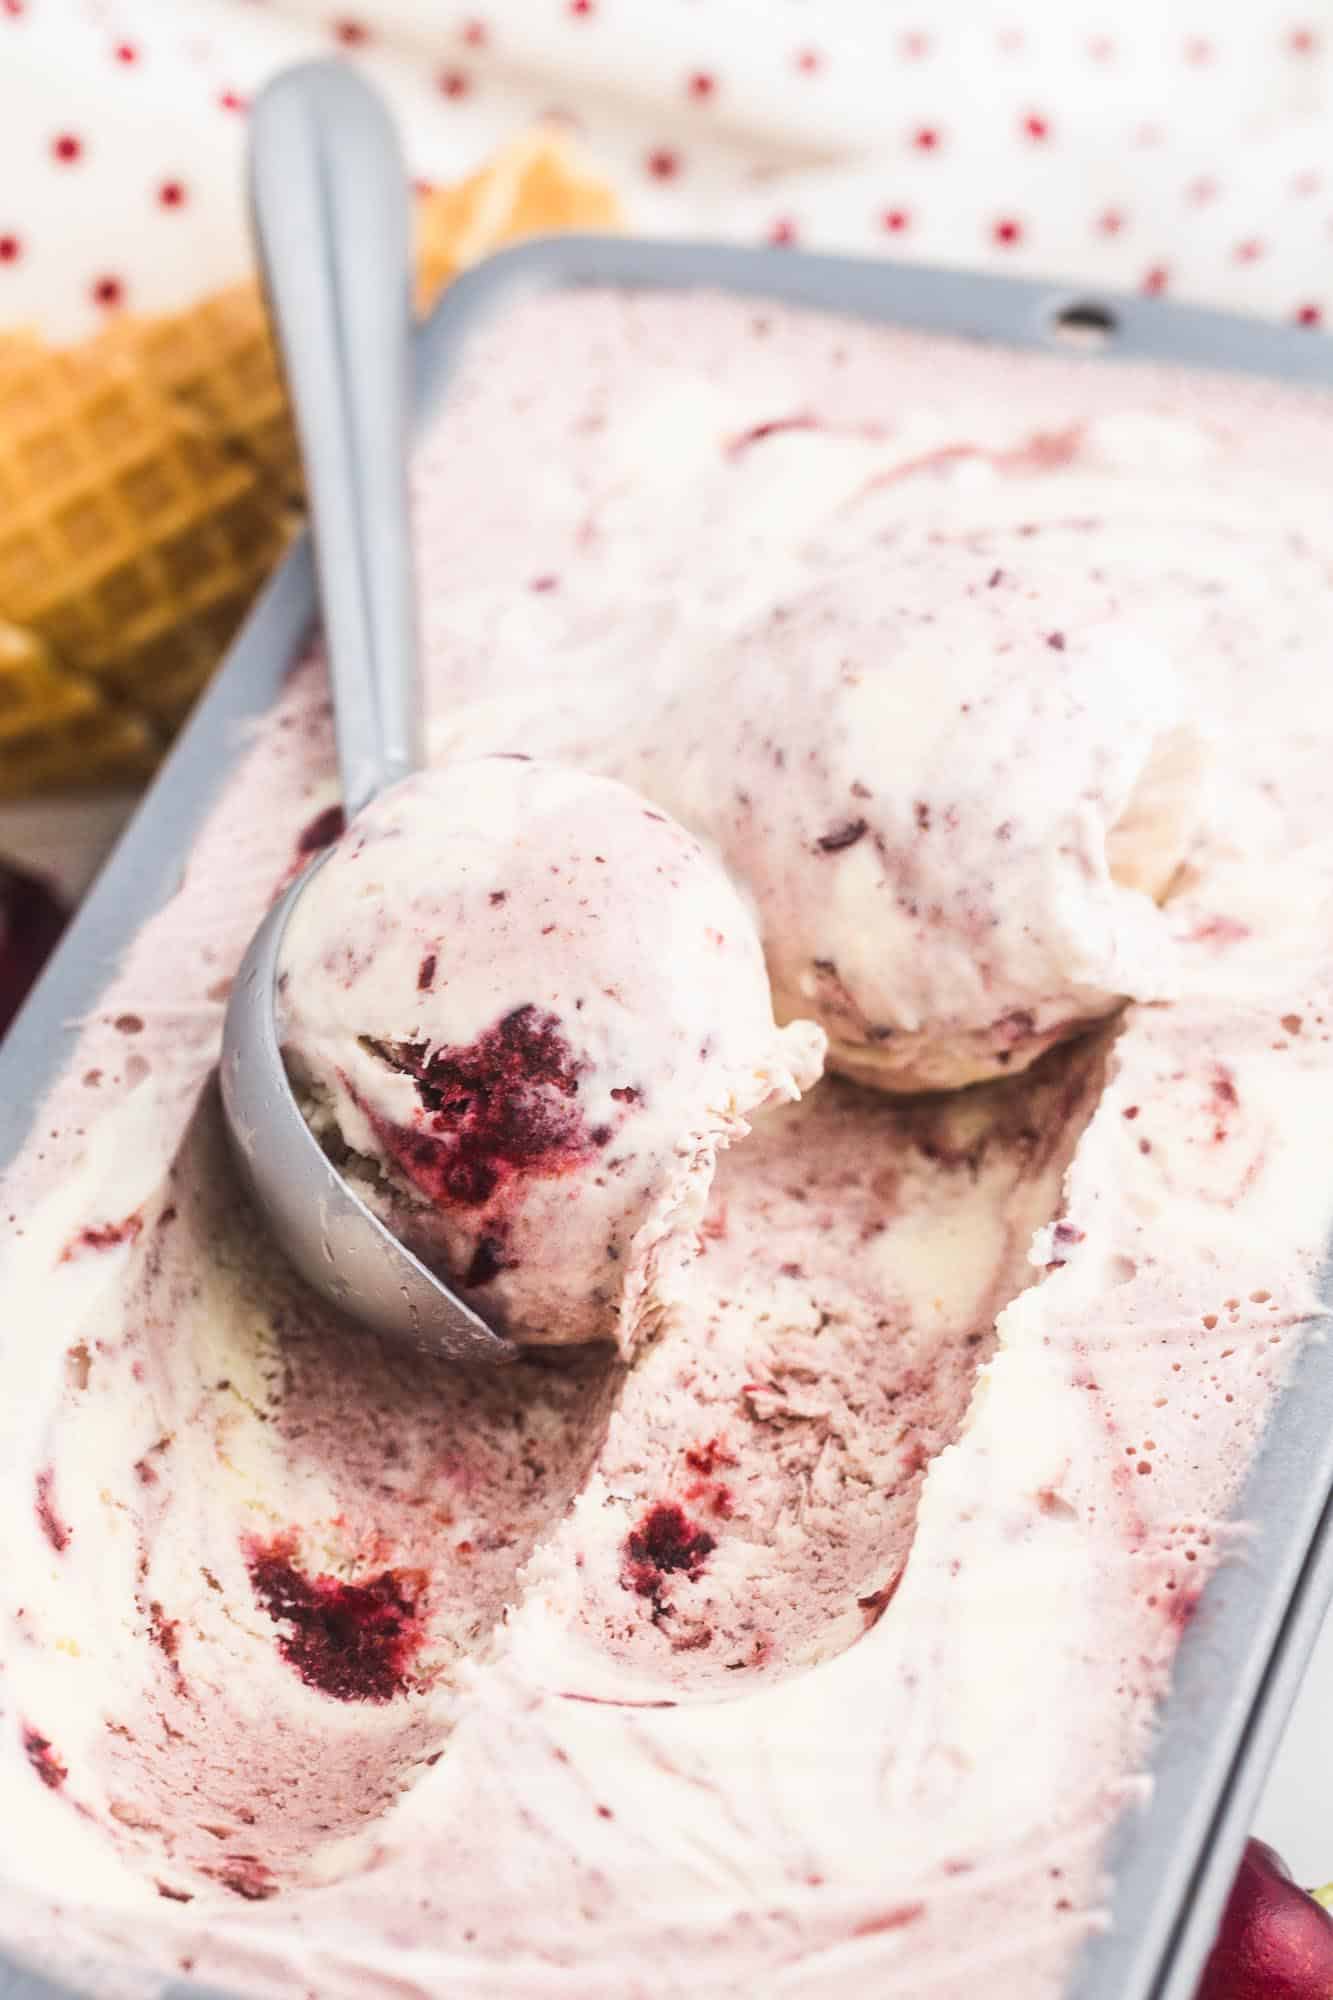 Scooping ice cream from a loaf pan, showing the texture of the cherry and vanilla ice cream